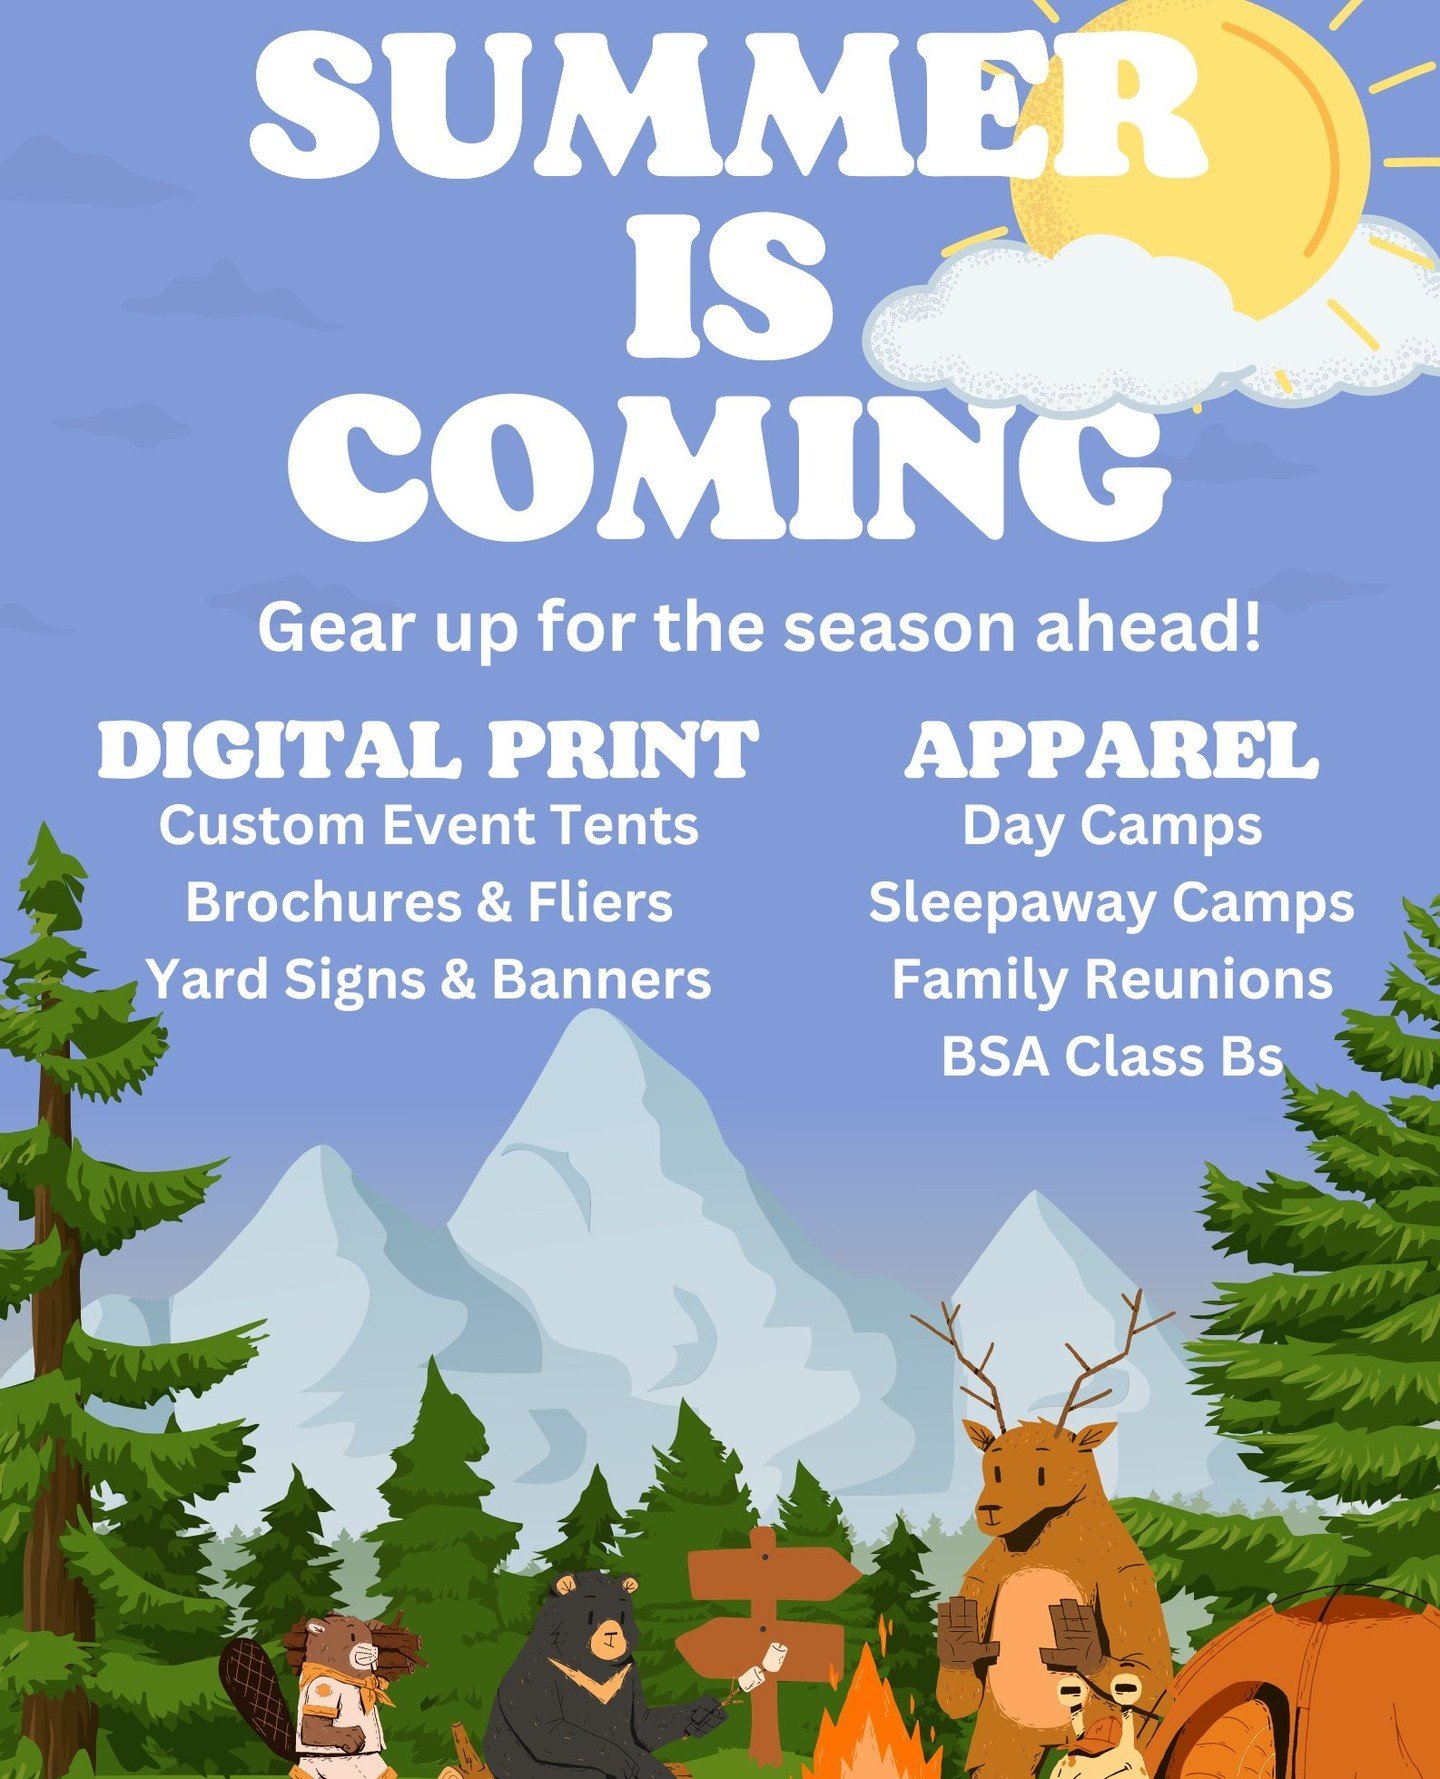 ☀️Sunny days are right around the corner! We've got everything you need to gear up for the season, wether you're clocking in or taking some time off.⁠
⁠
🌲Everything you could dream of to make your summer camp exeprience remembered forever:⁠
⁠
🤸Staf